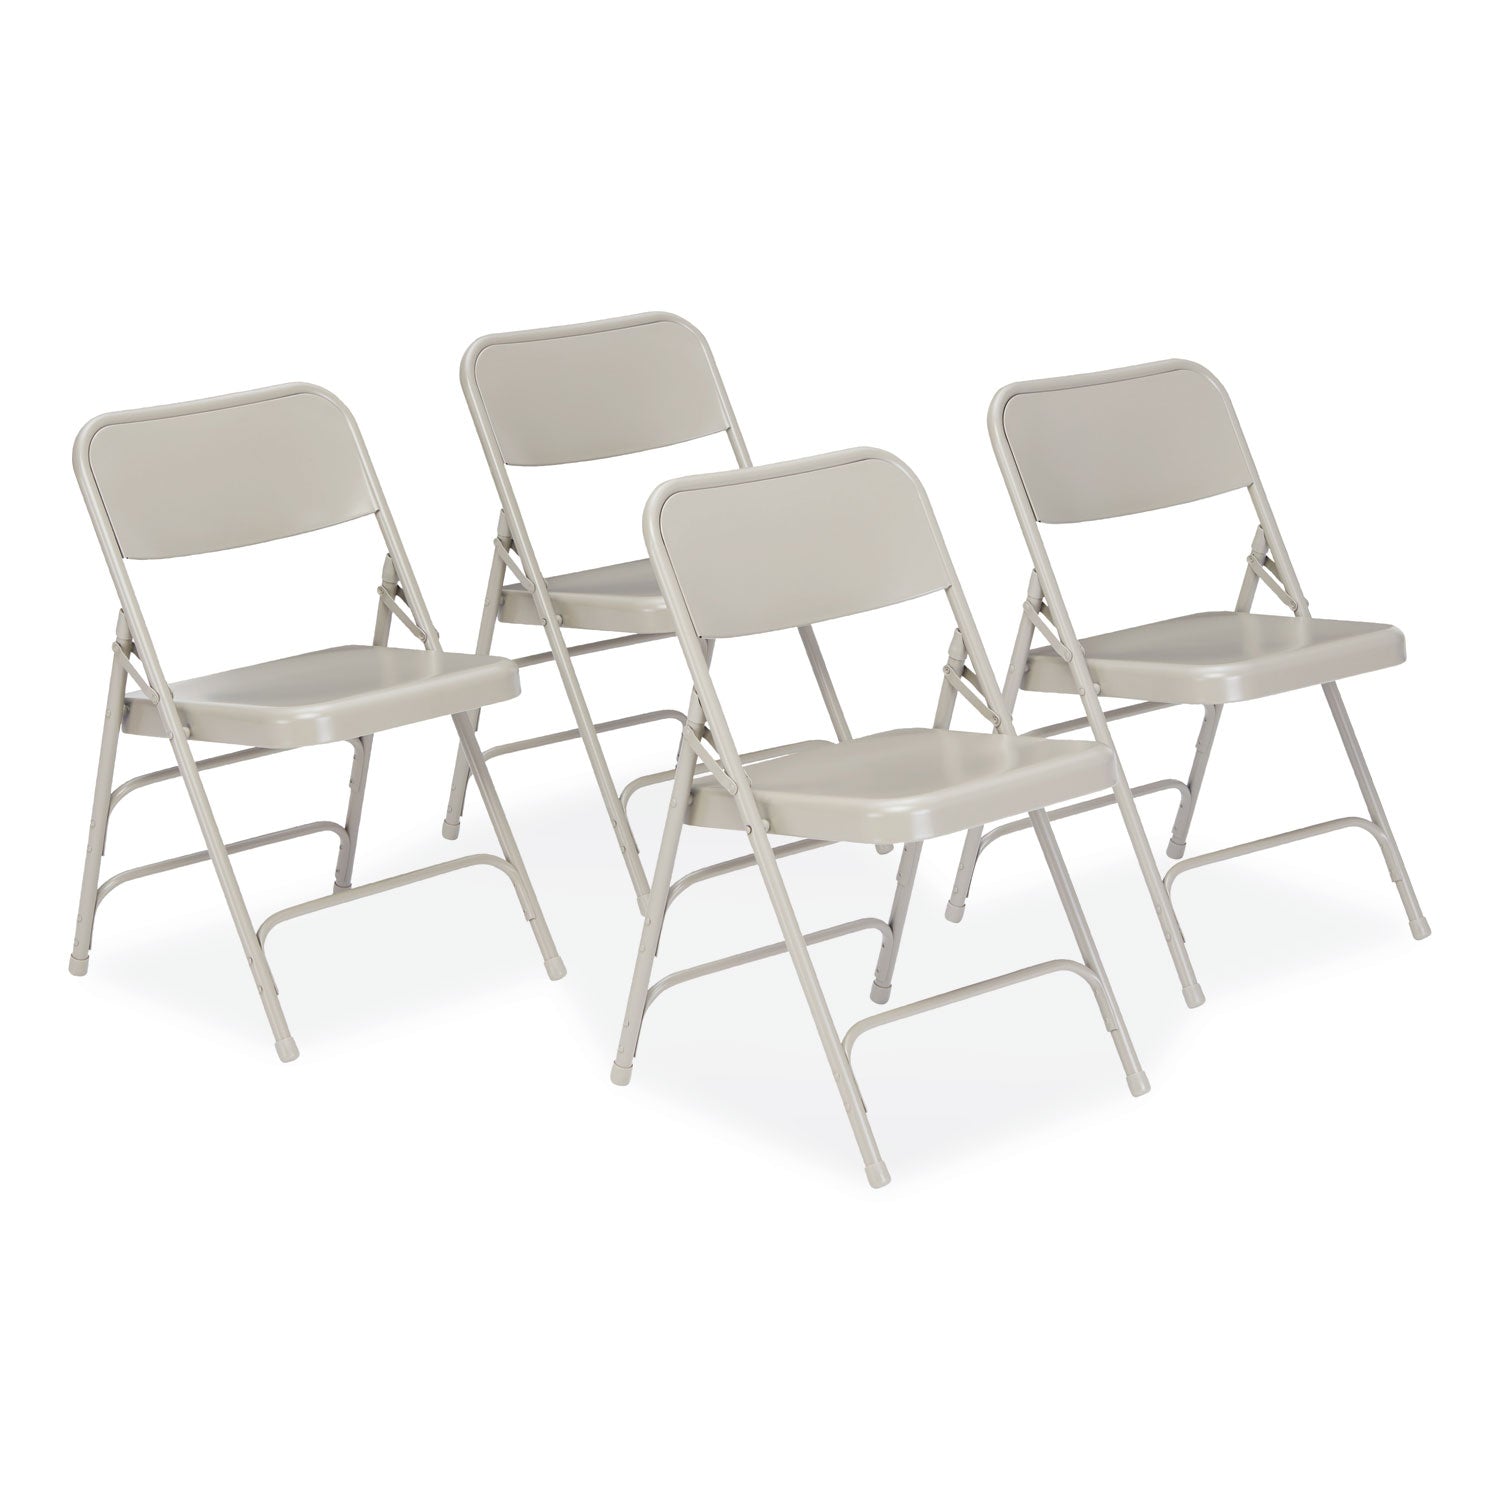 300-series-deluxe-all-steel-triple-brace-folding-chair-supports-480-lb-1725-seat-height-gray-4-ctships-in-1-3-bus-days_nps302 - 1